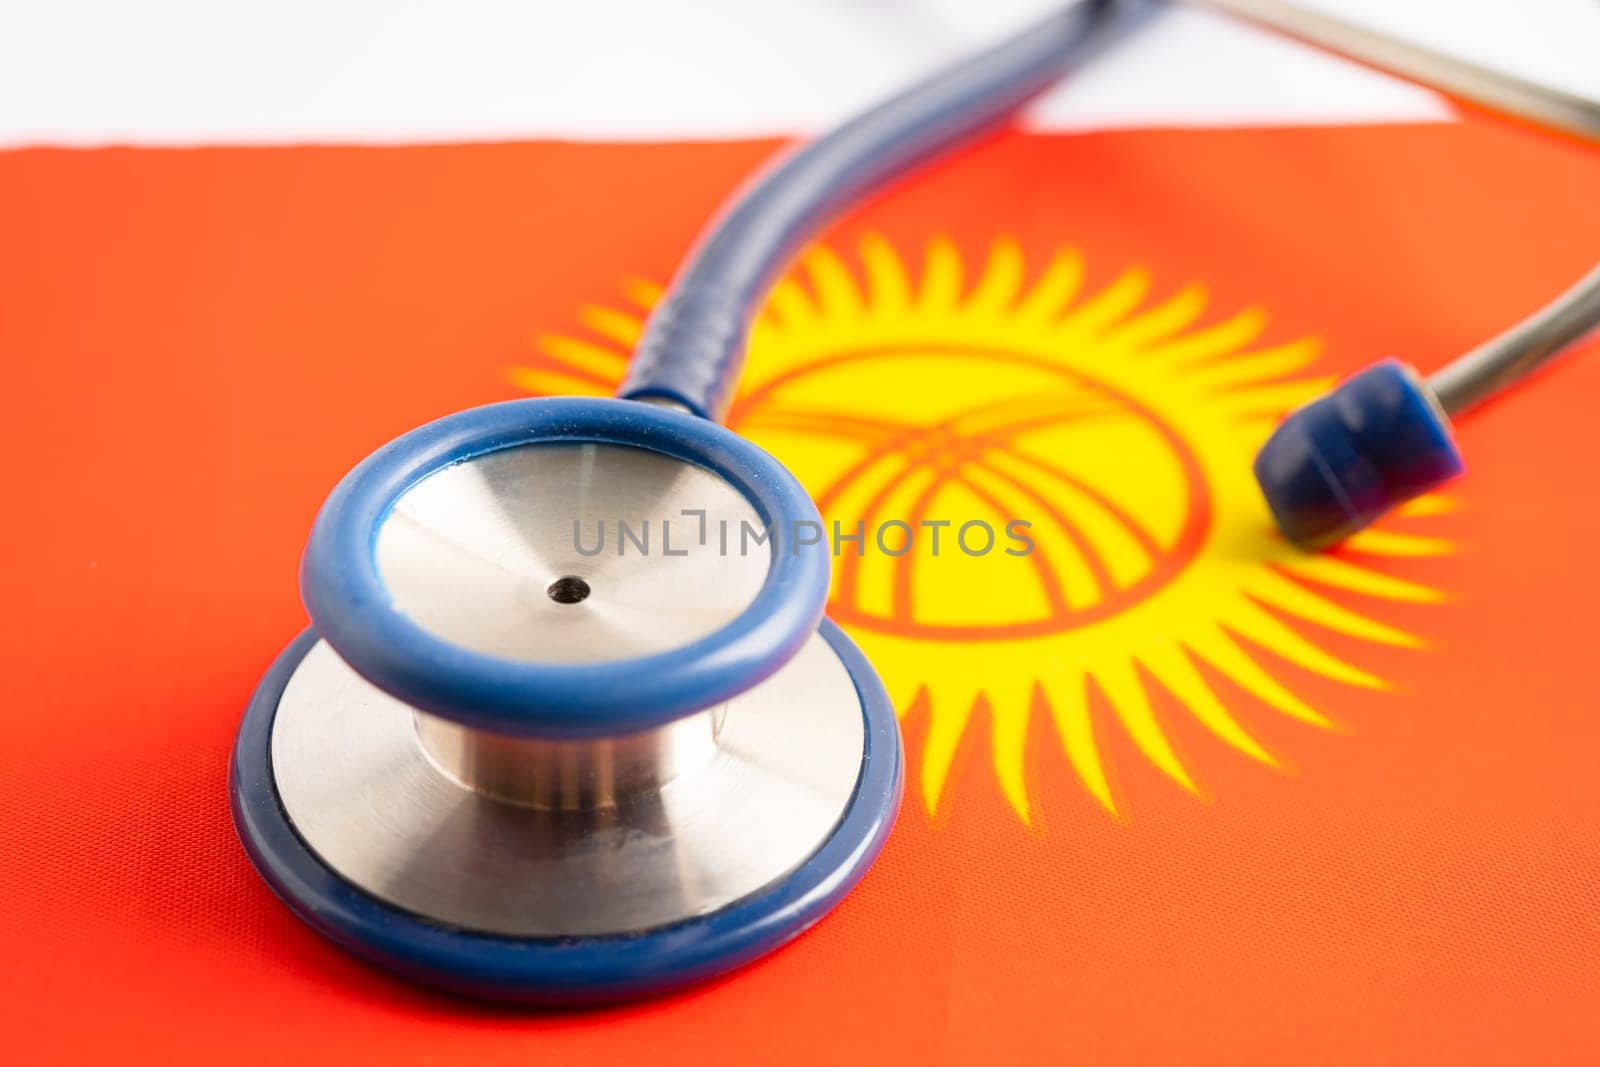 Stethoscope on Kyrgyzstan flag background, Business and finance concept.